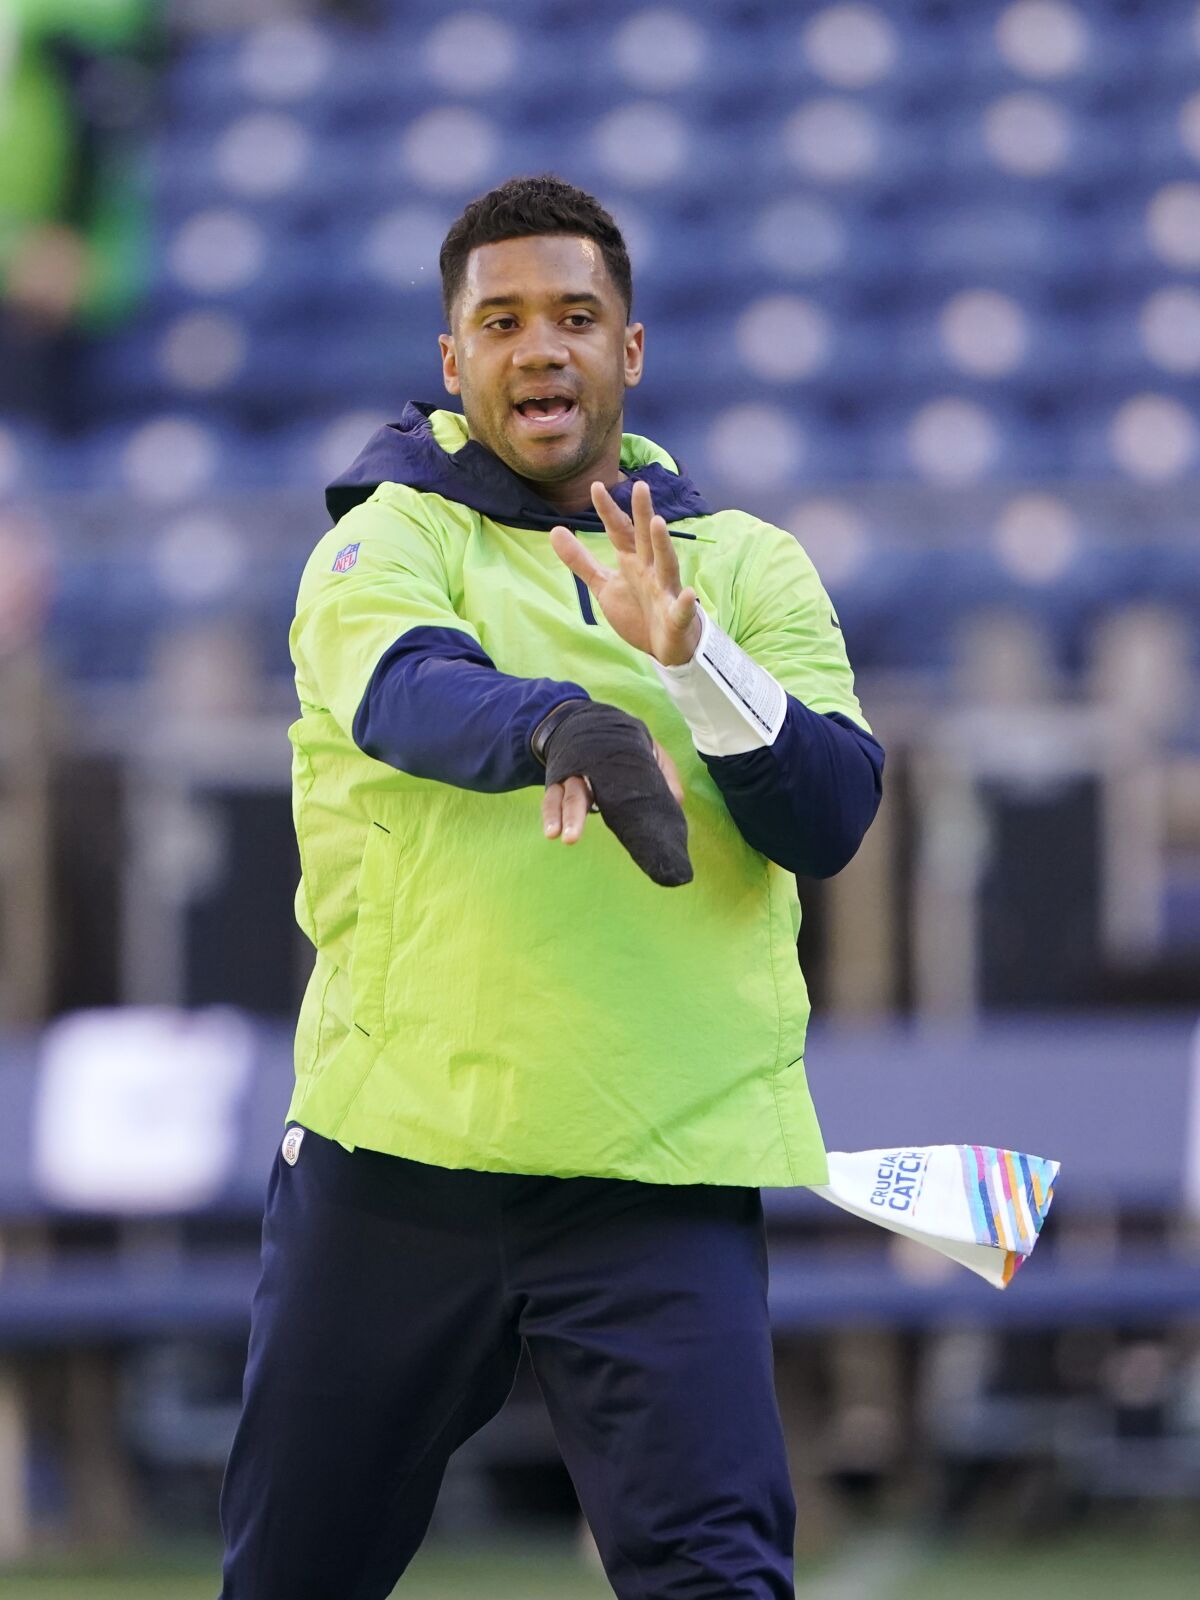 Seattle Seahawks injured quarterback Russell Wilson mimics a throwing motion before an NFL football game against the Jacksonville Jaguars, Sunday, Oct. 31, 2021, in Seattle. (AP Photo/Ted S. Warren)